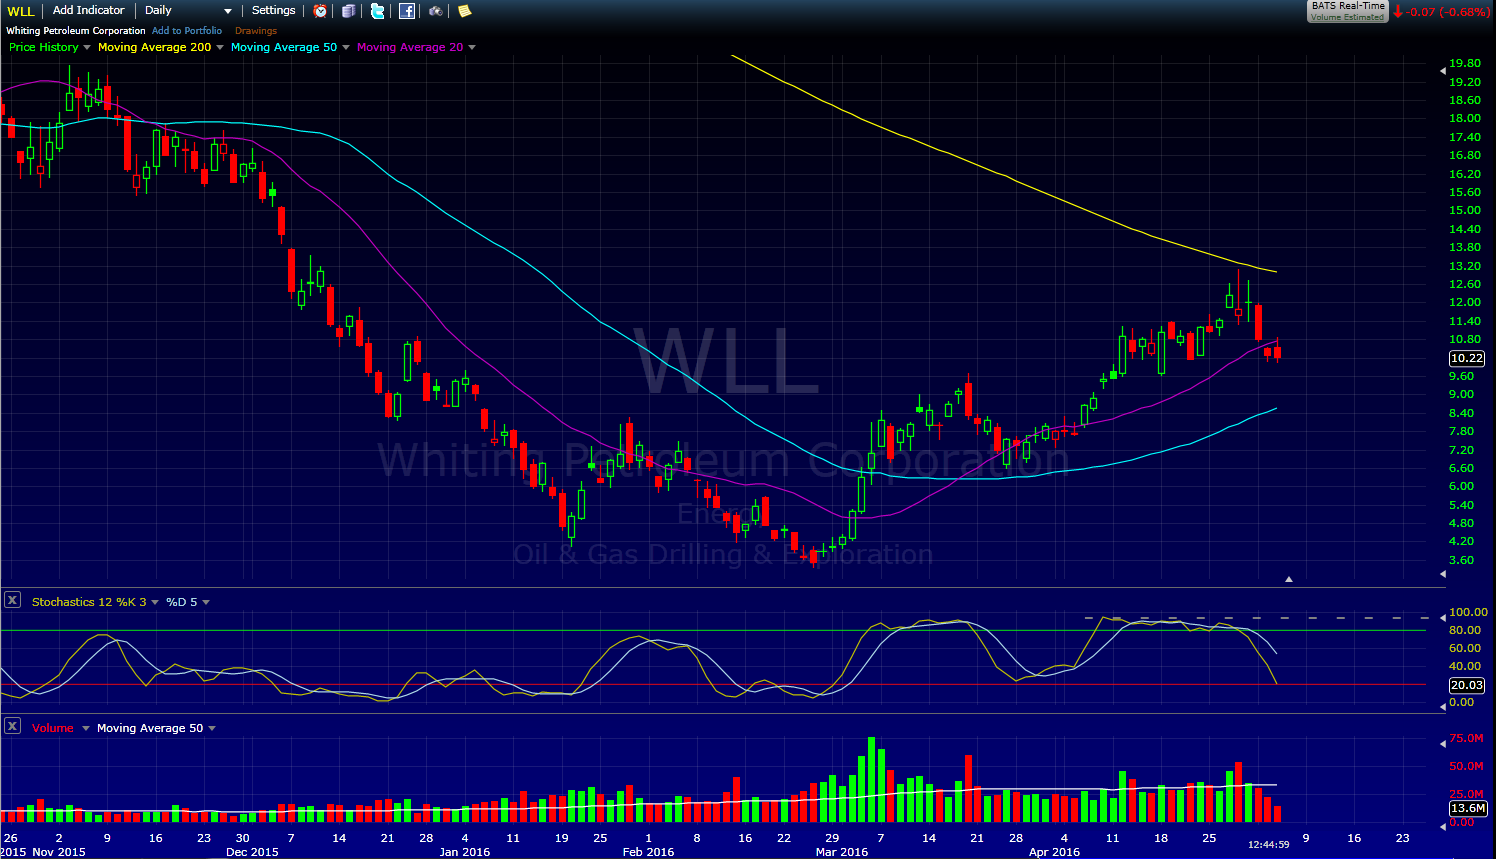 WLL Oil name, watching for support bounce soon.